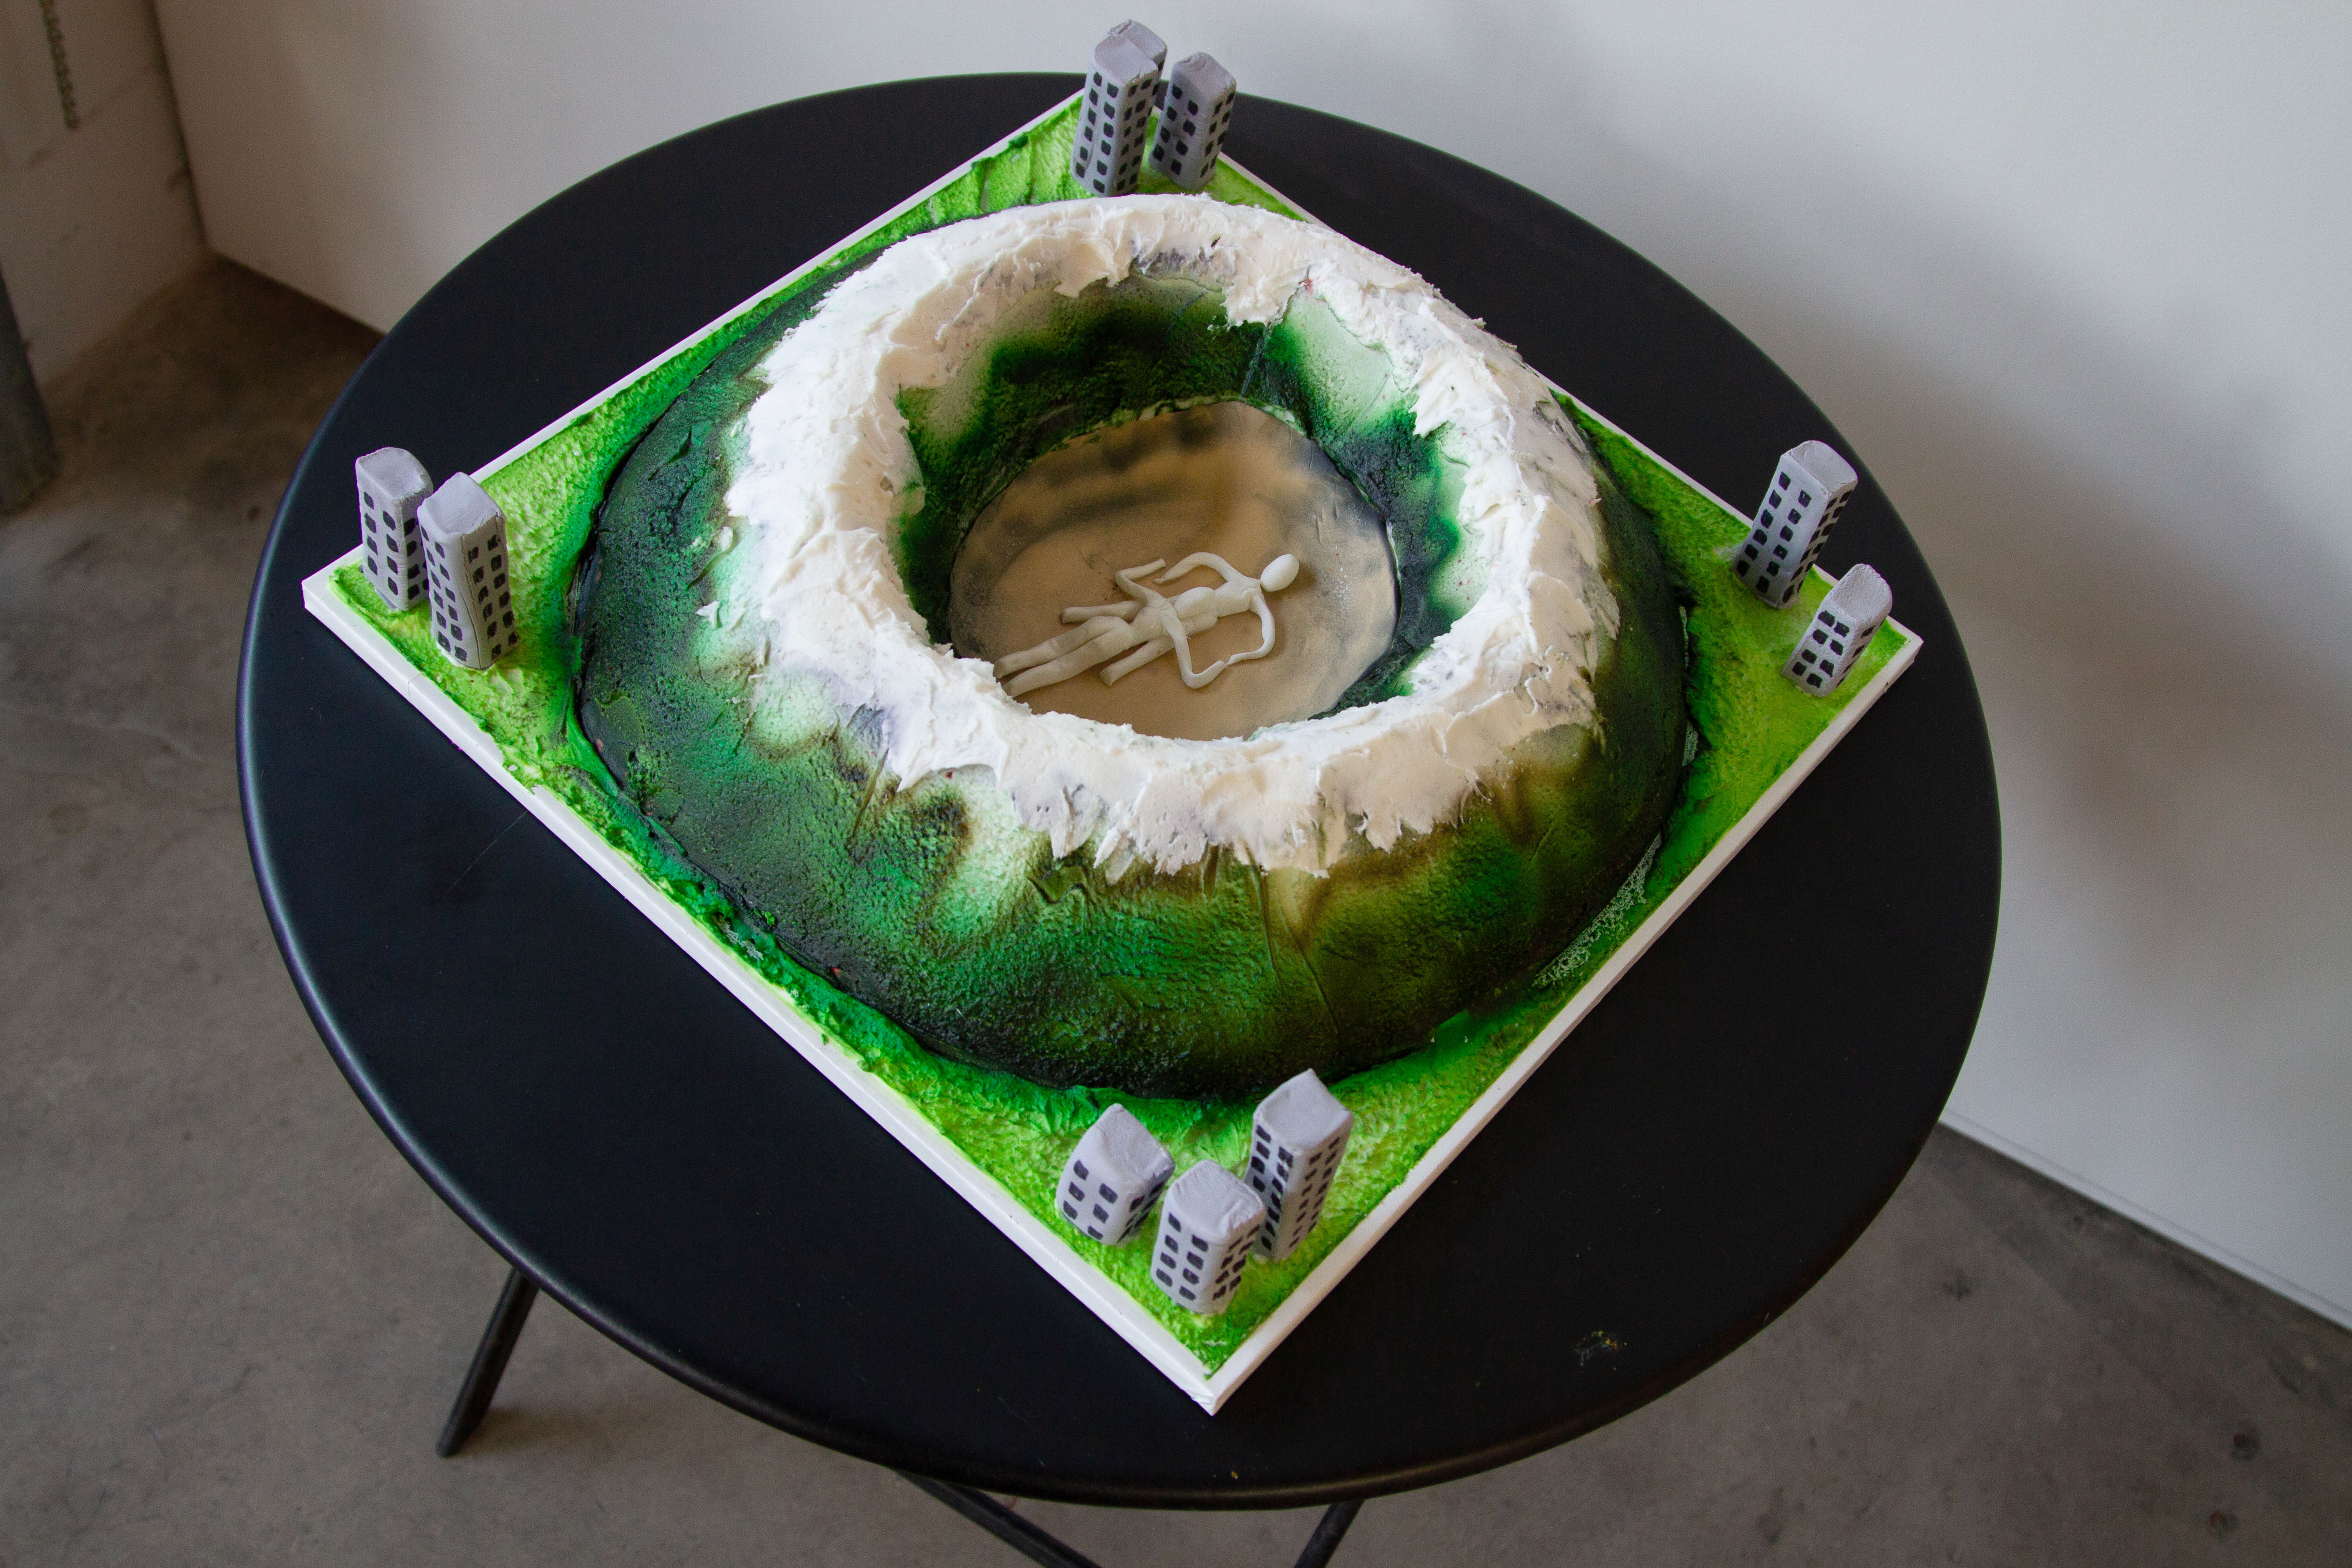 Ariel view of a cake shaped like a mountainous crater with two figures engaged in felatio in the center surrounded by buildings on a black table